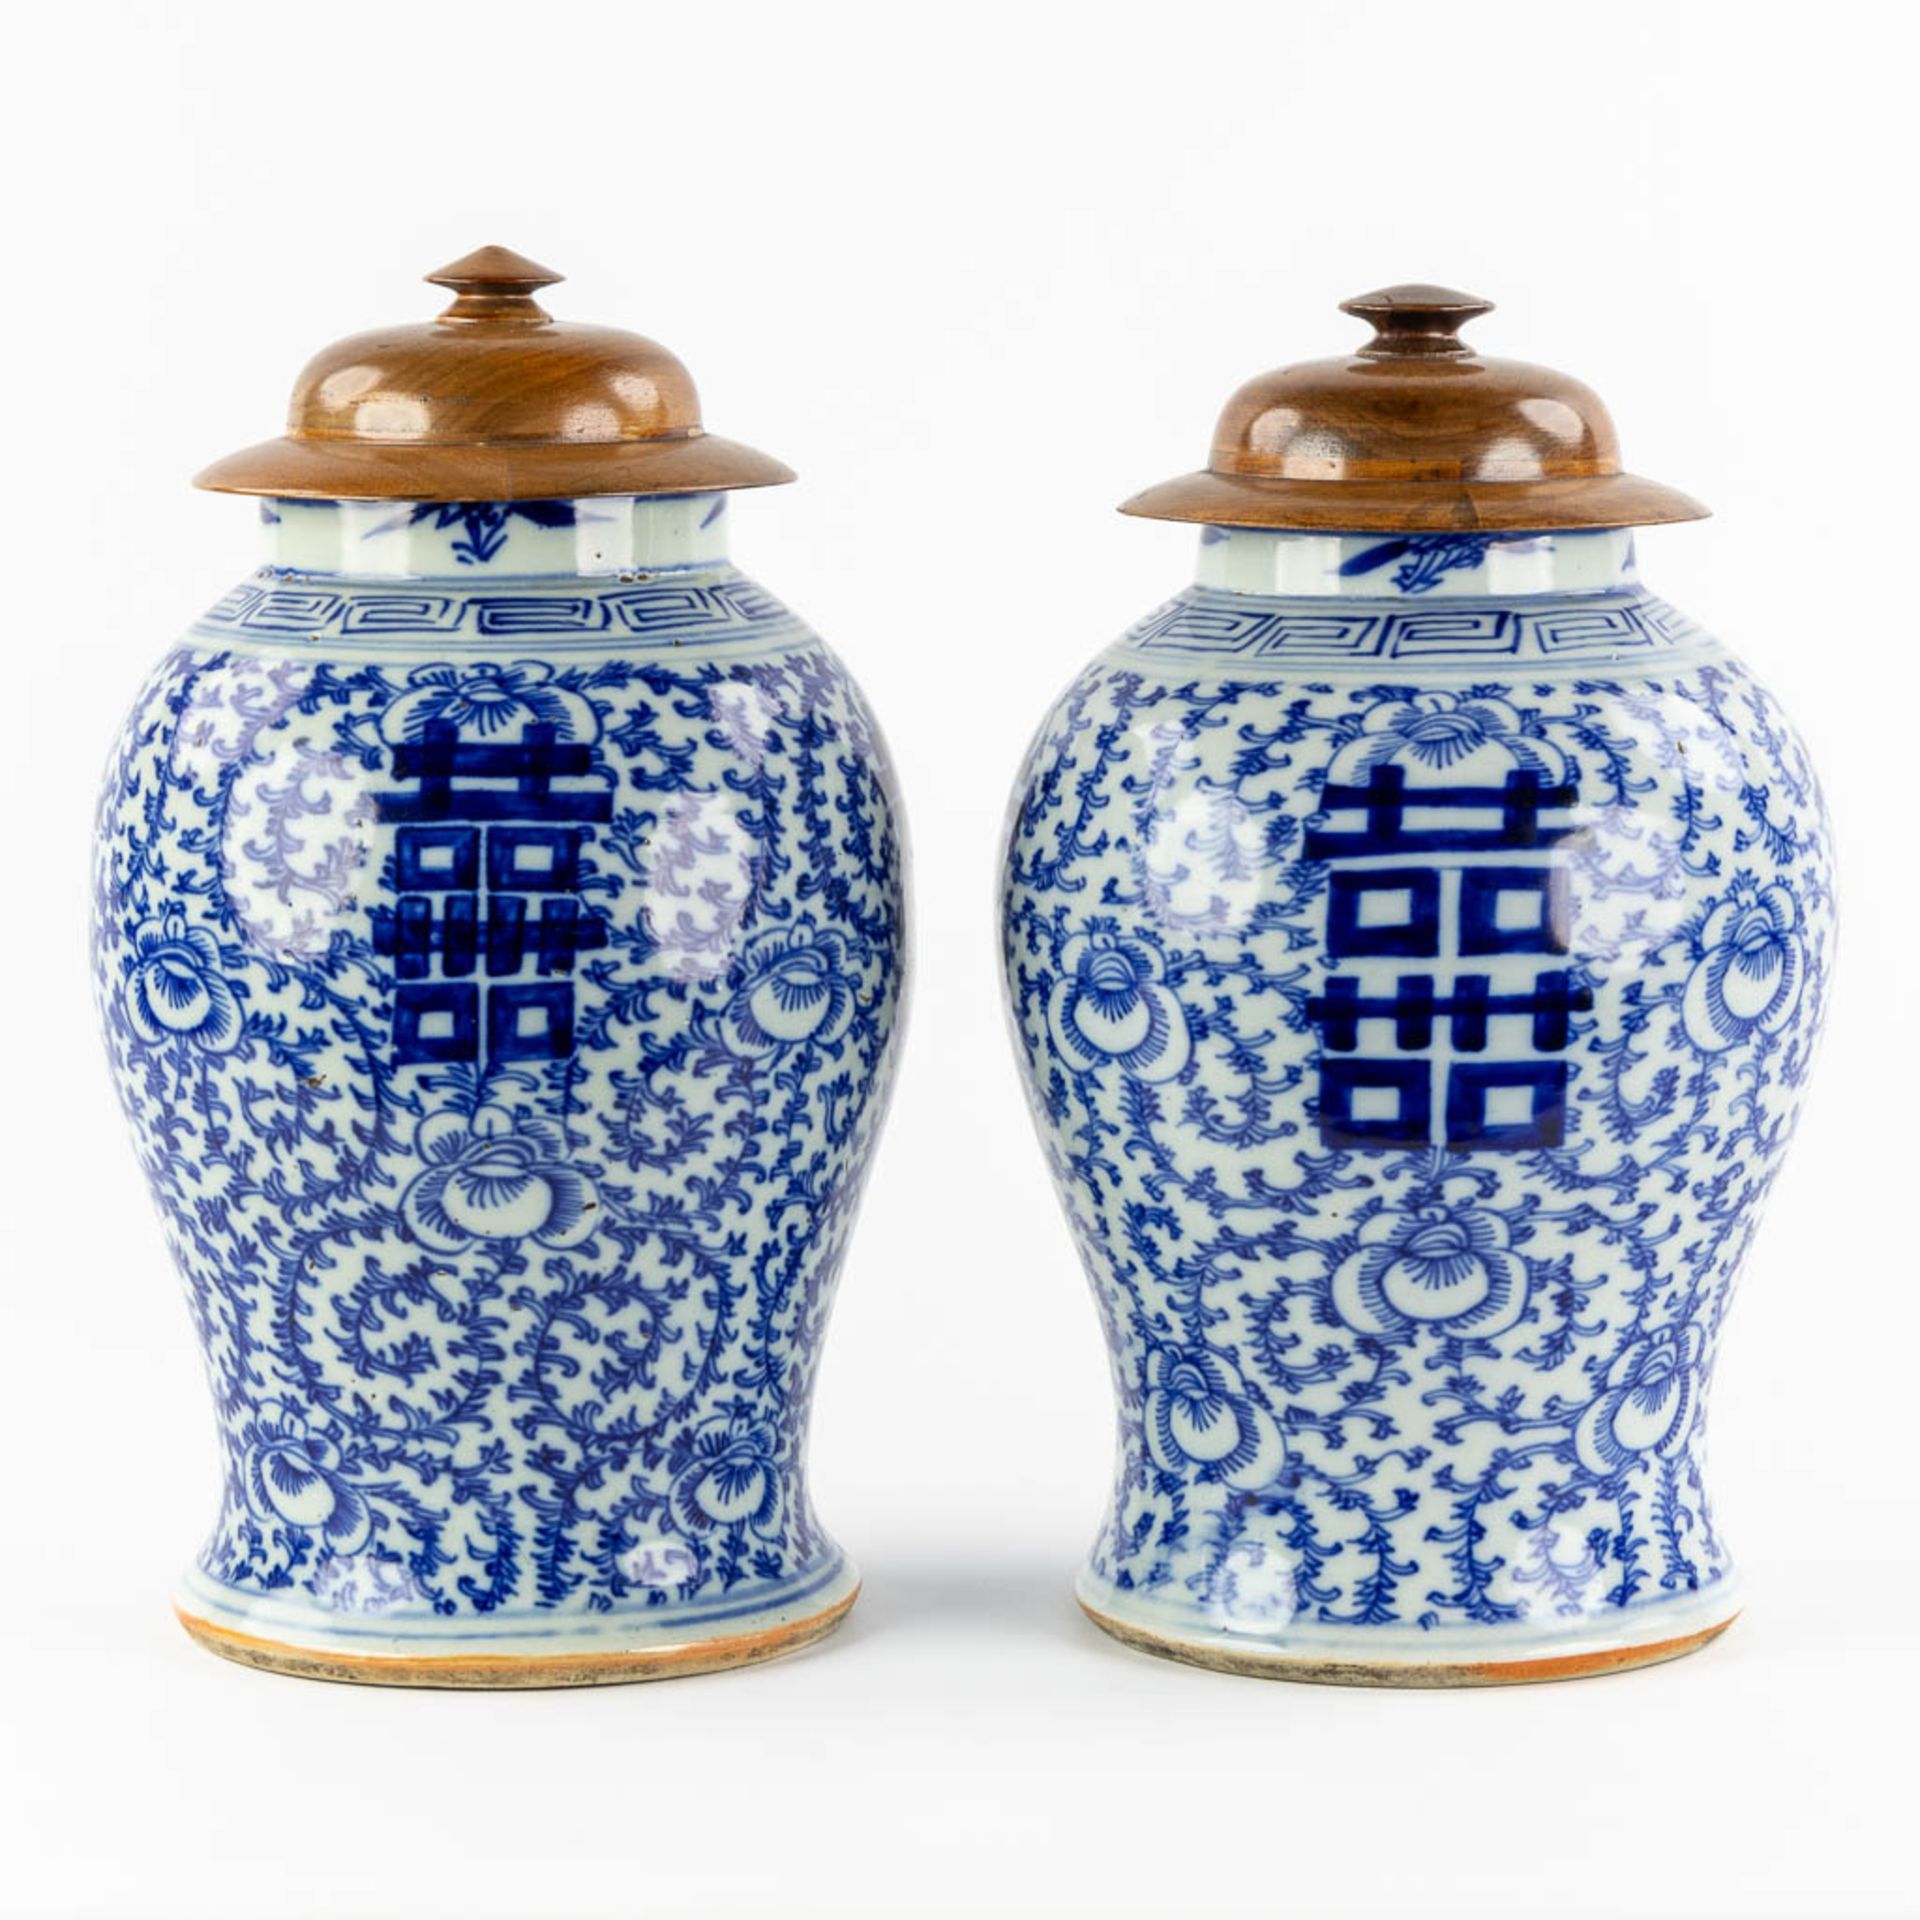 A pair of Chinese vases with a blue-white decor and a Double Xi-sign. 19th/20th C. (H:41 x D:26 cm) - Image 3 of 8